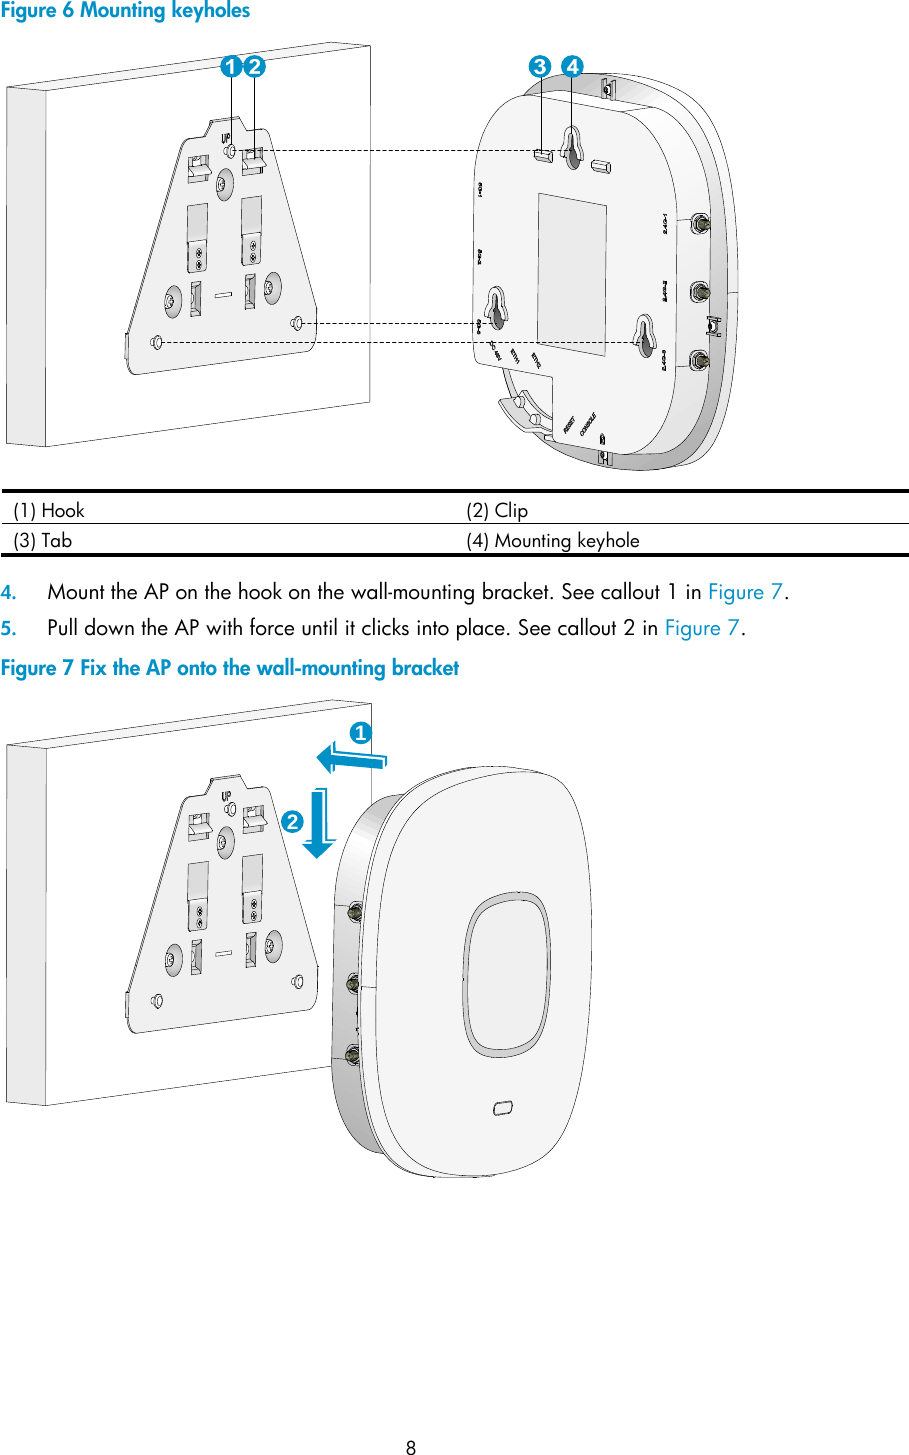  8 Figure 6 Mounting keyholes  (1) Hook  (2) Clip (3) Tab  (4) Mounting keyhole  4. Mount the AP on the hook on the wall-mounting bracket. See callout 1 in Figure 7. 5. Pull down the AP with force until it clicks into place. See callout 2 in Figure 7. Figure 7 Fix the AP onto the wall-mounting bracket   12